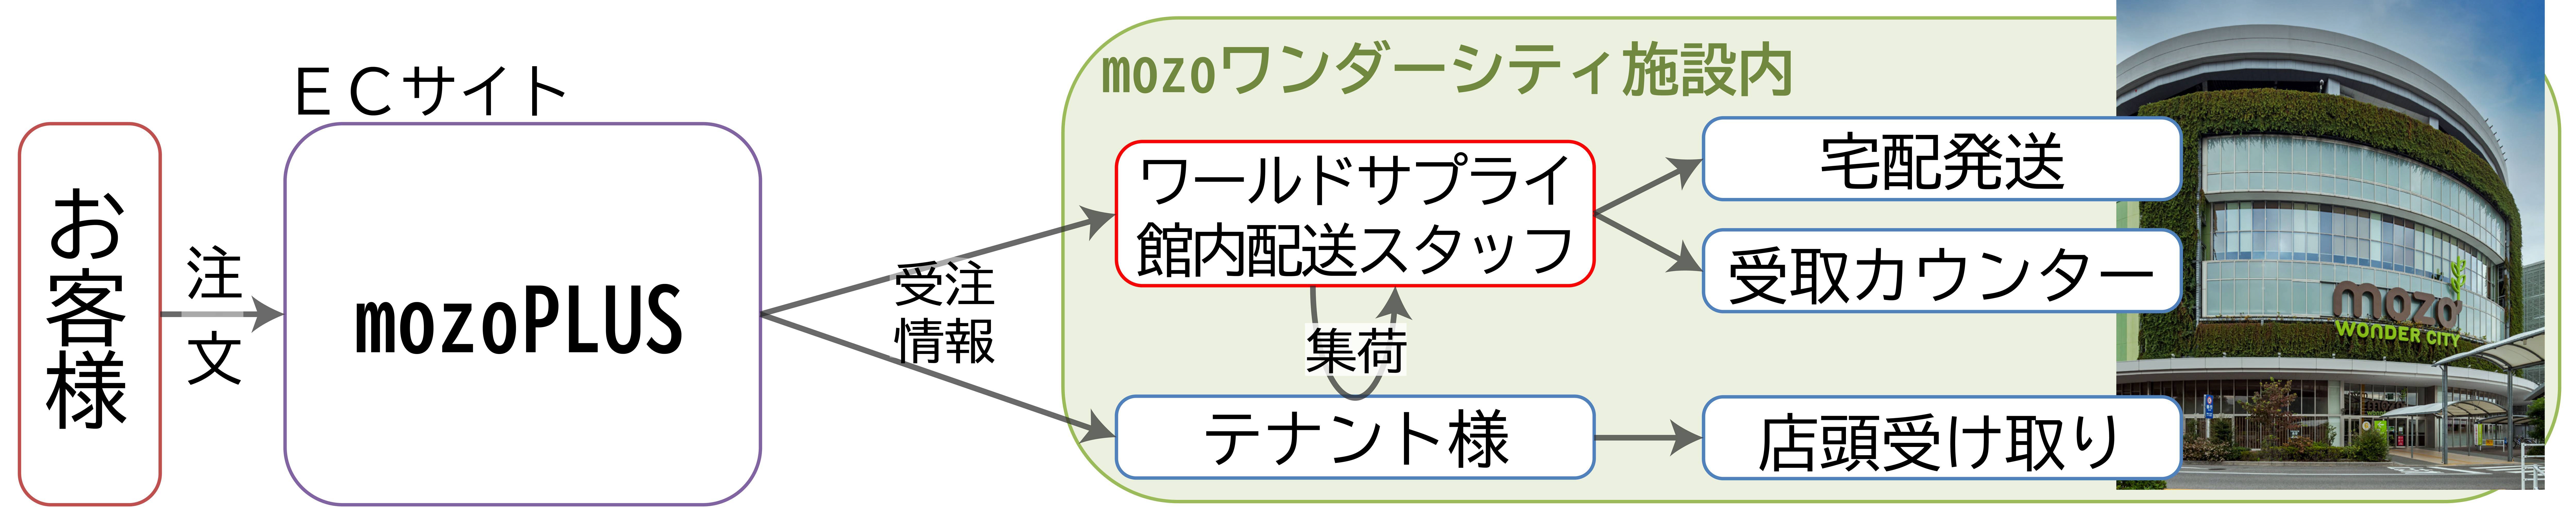 mozo@3x.png